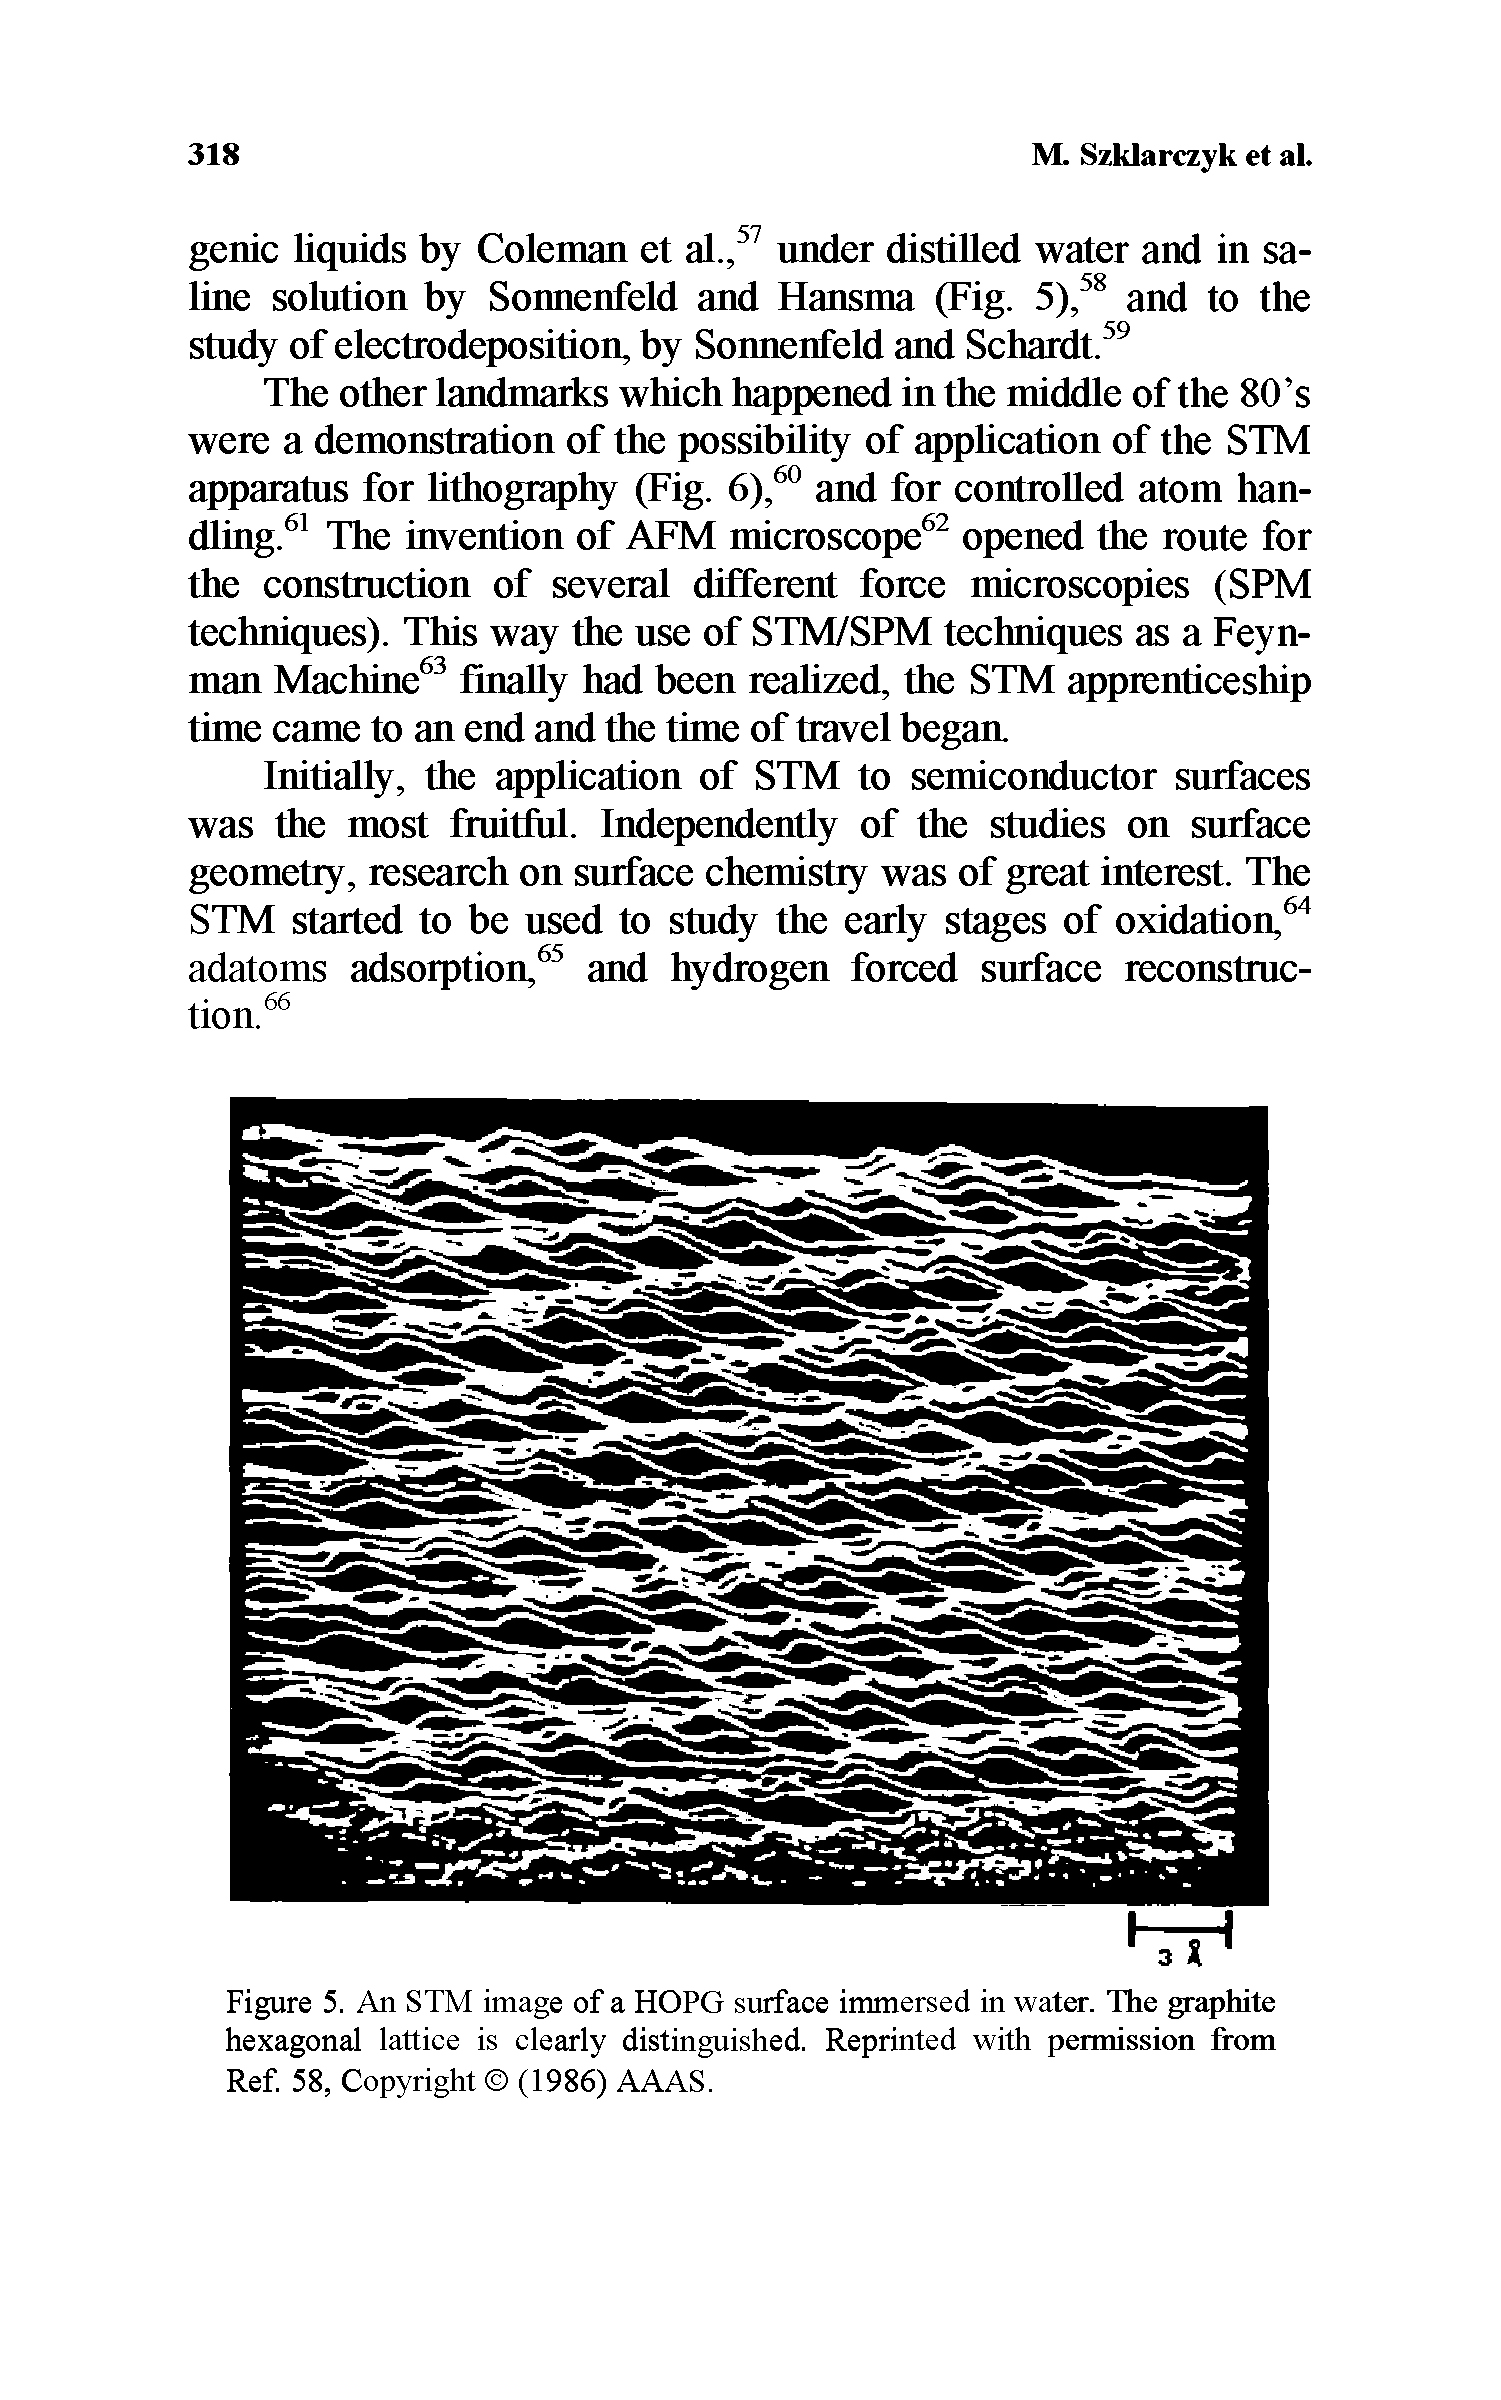 Figure 5. An STM image of a HOPG surface immersed in water. The graphite hexagonal lattice is clearly distinguished. Reprinted with permission from Ref. 58, Copyright (1986) AAAS.